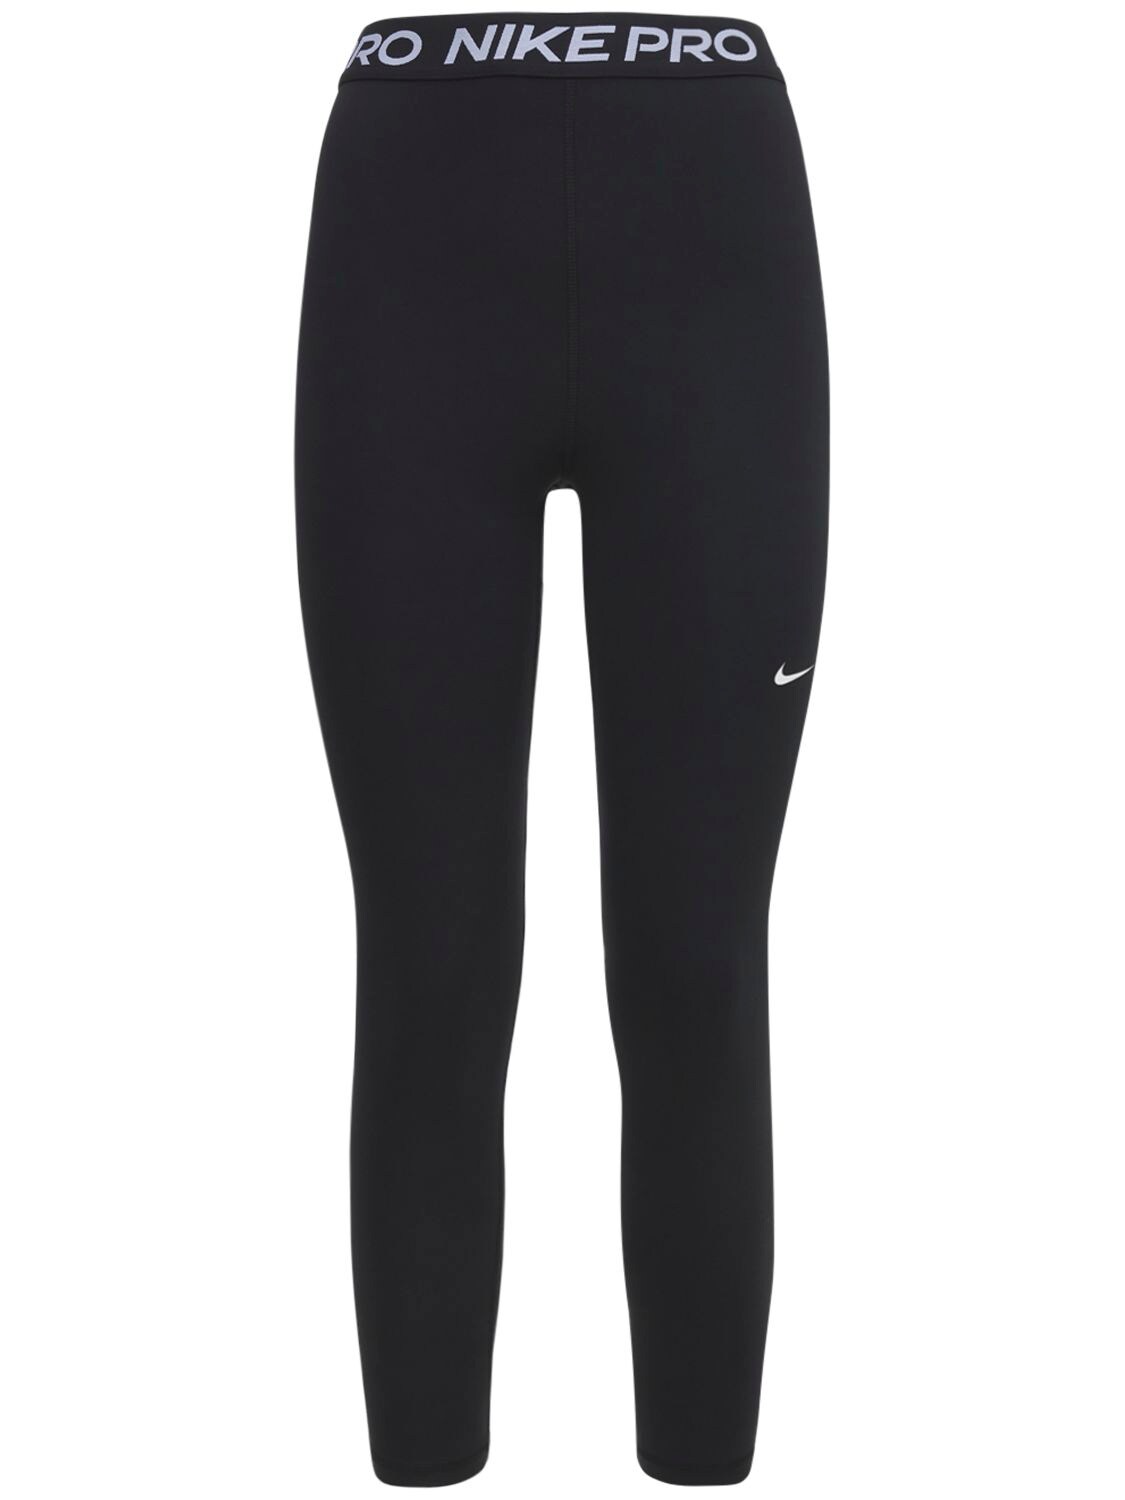 Image of 7/8 Pro 365 Tights